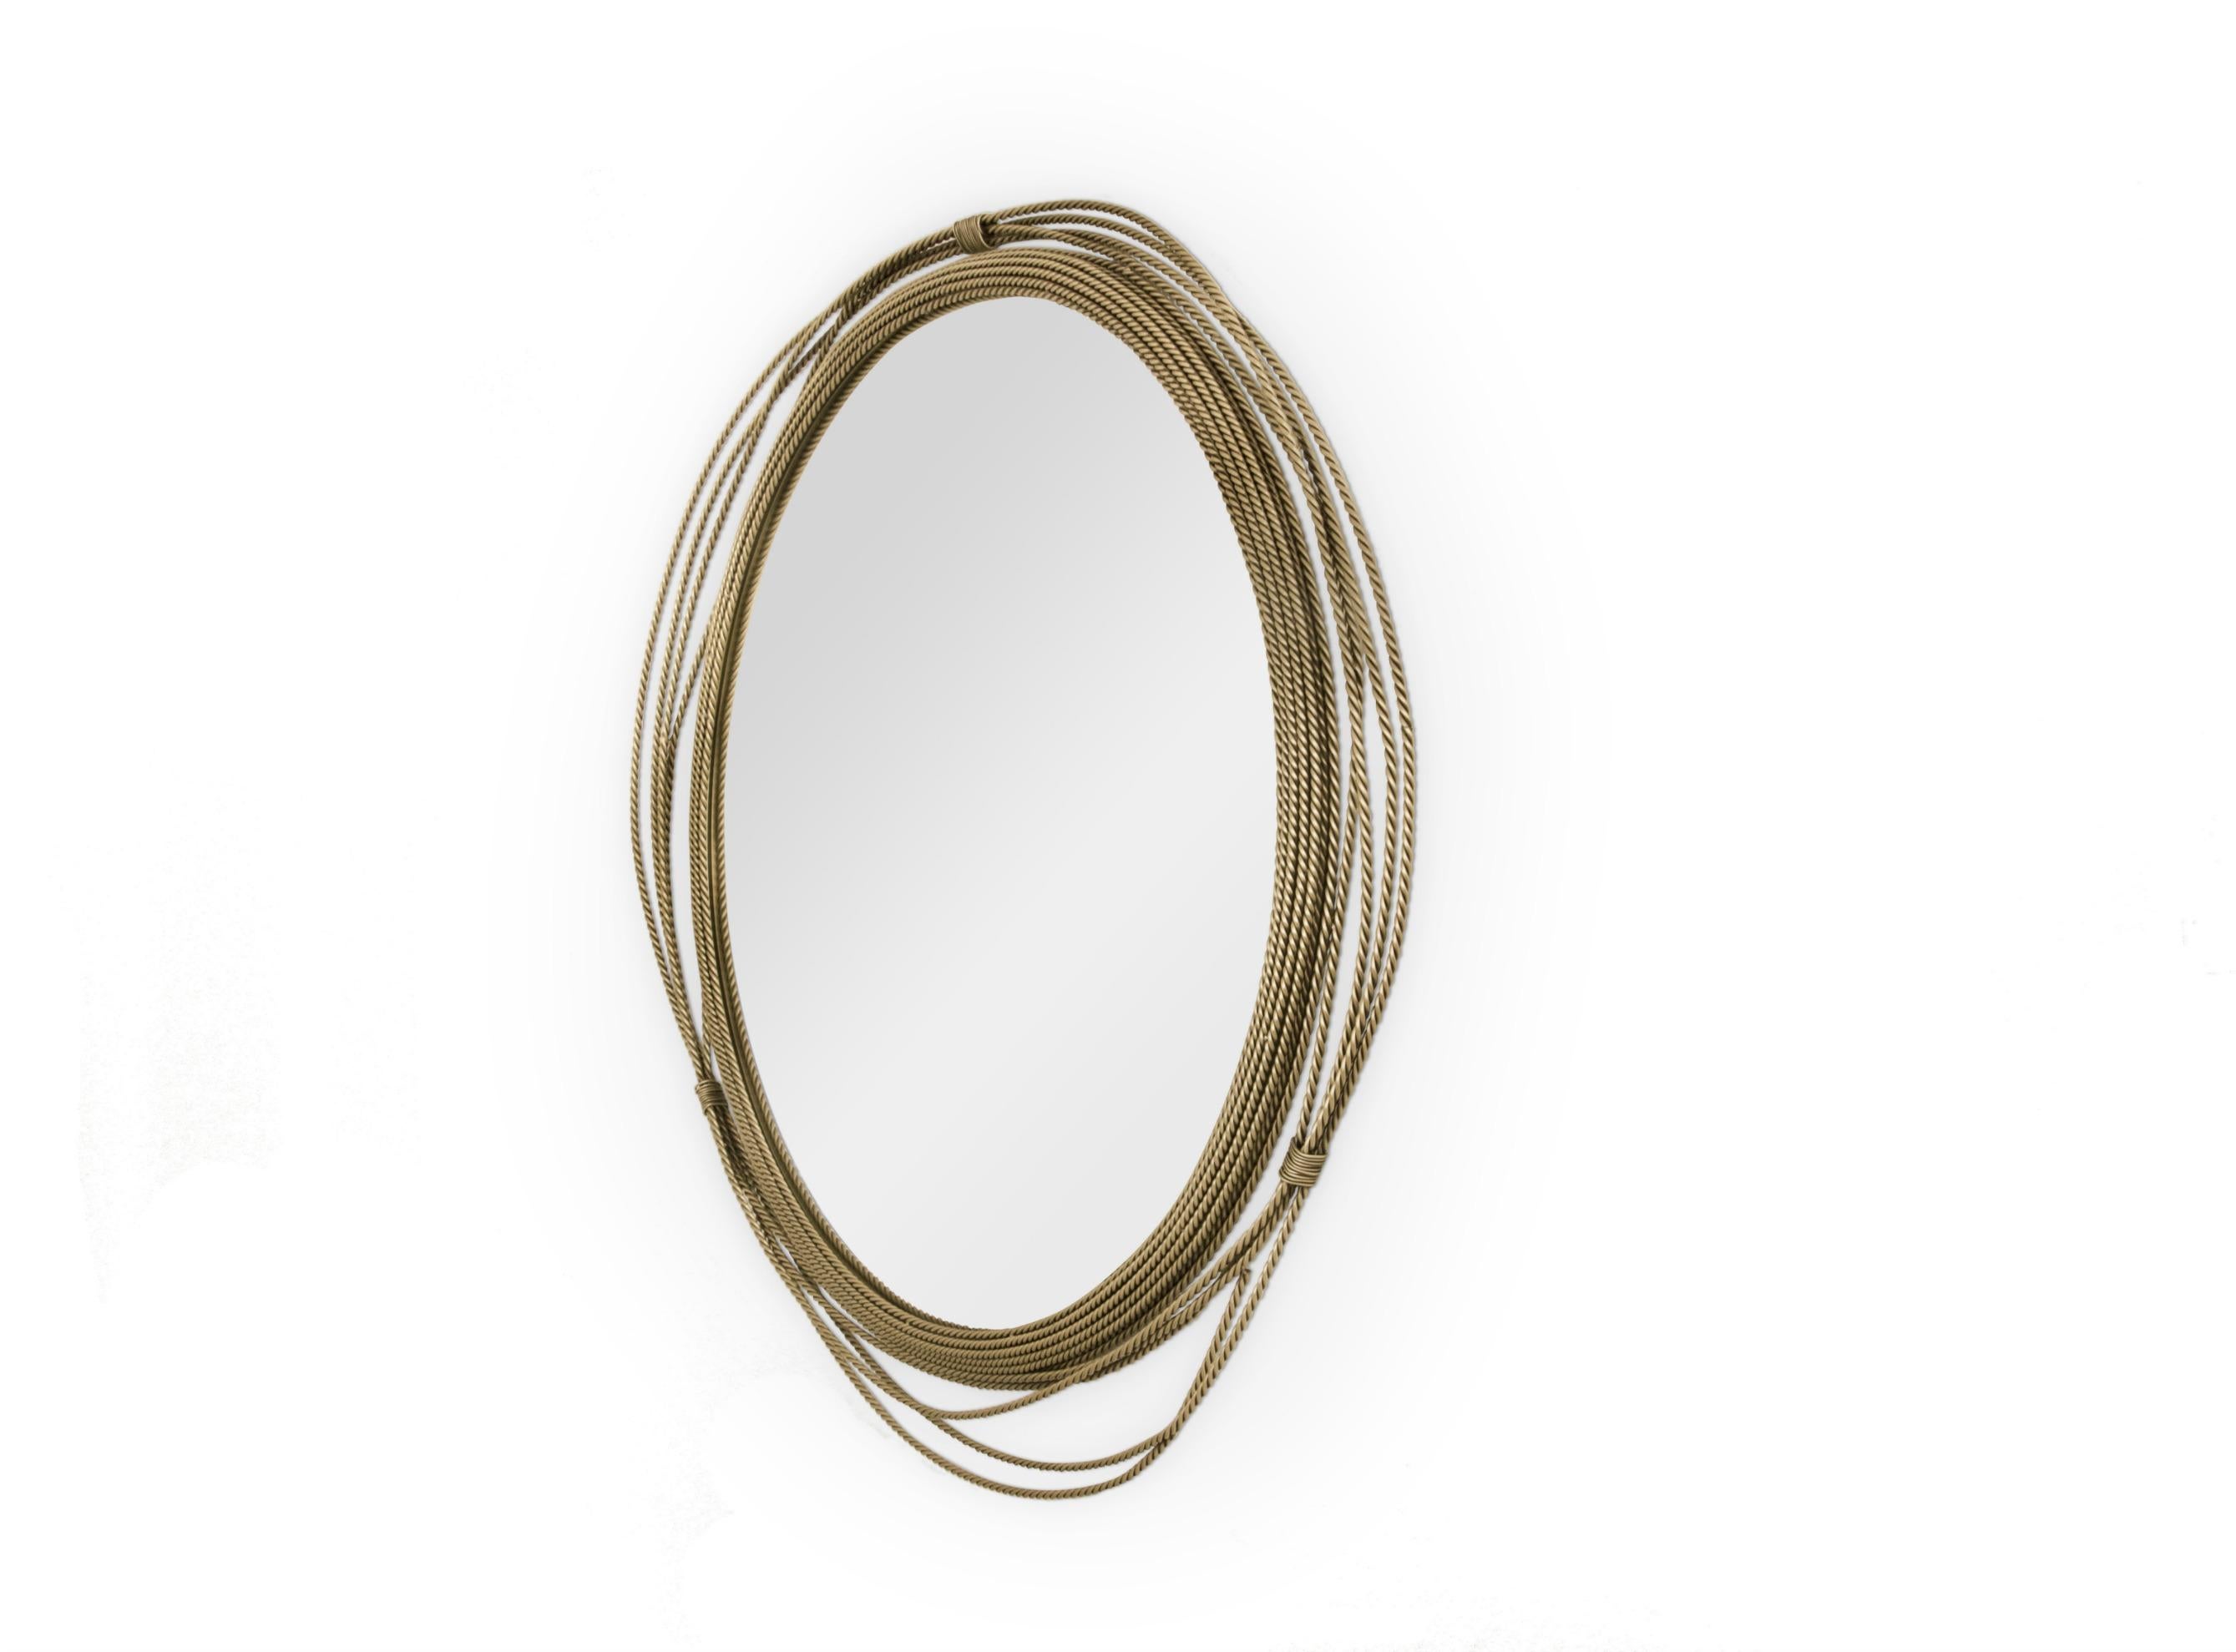 Kayan women are known for using neck rings with the intention of lengthening their necks. All the way from Myanmar, KAYAN Round Mirror is made of a unique aged brushed brass structure. This decorative mirror will surely spice up a boring wall.
Aged